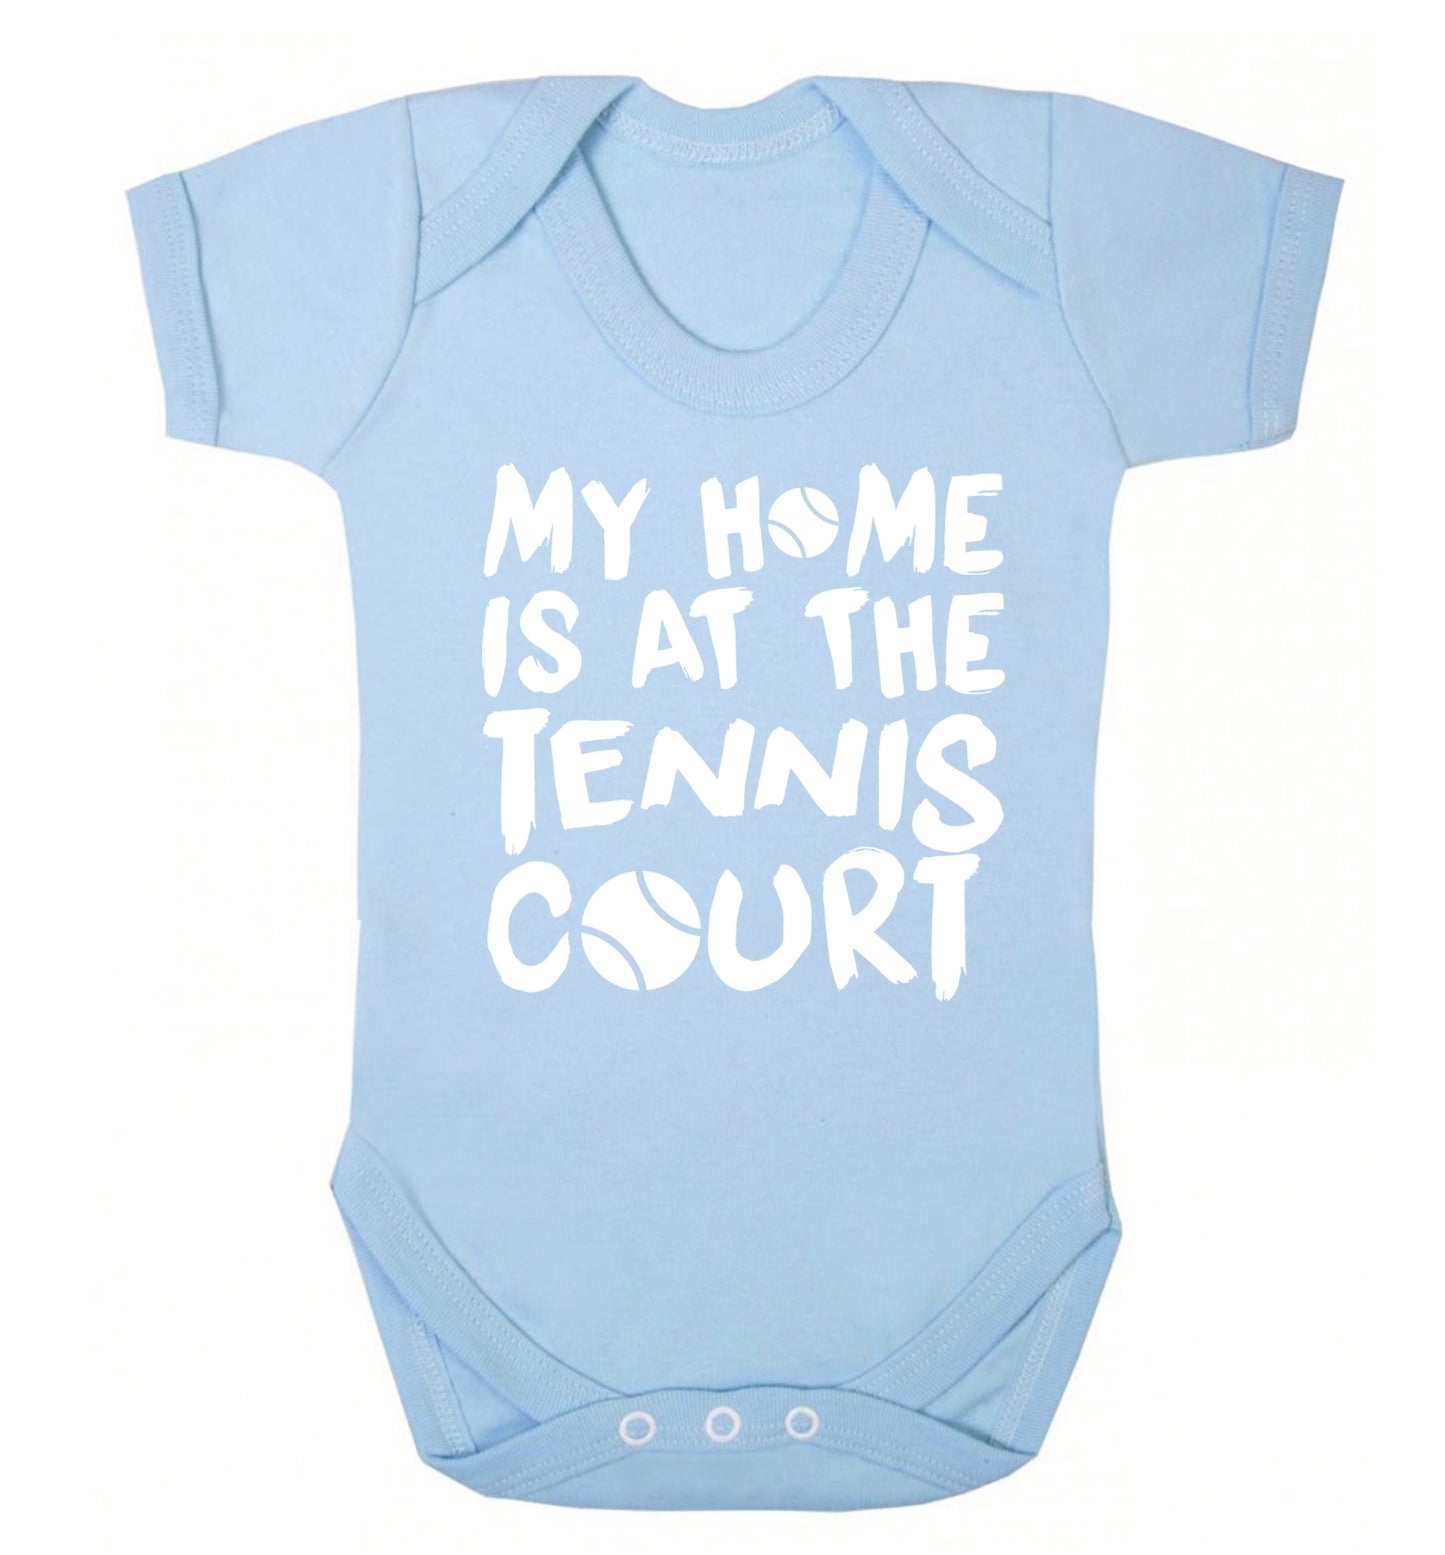 My home is at the tennis court Baby Vest pale blue 18-24 months